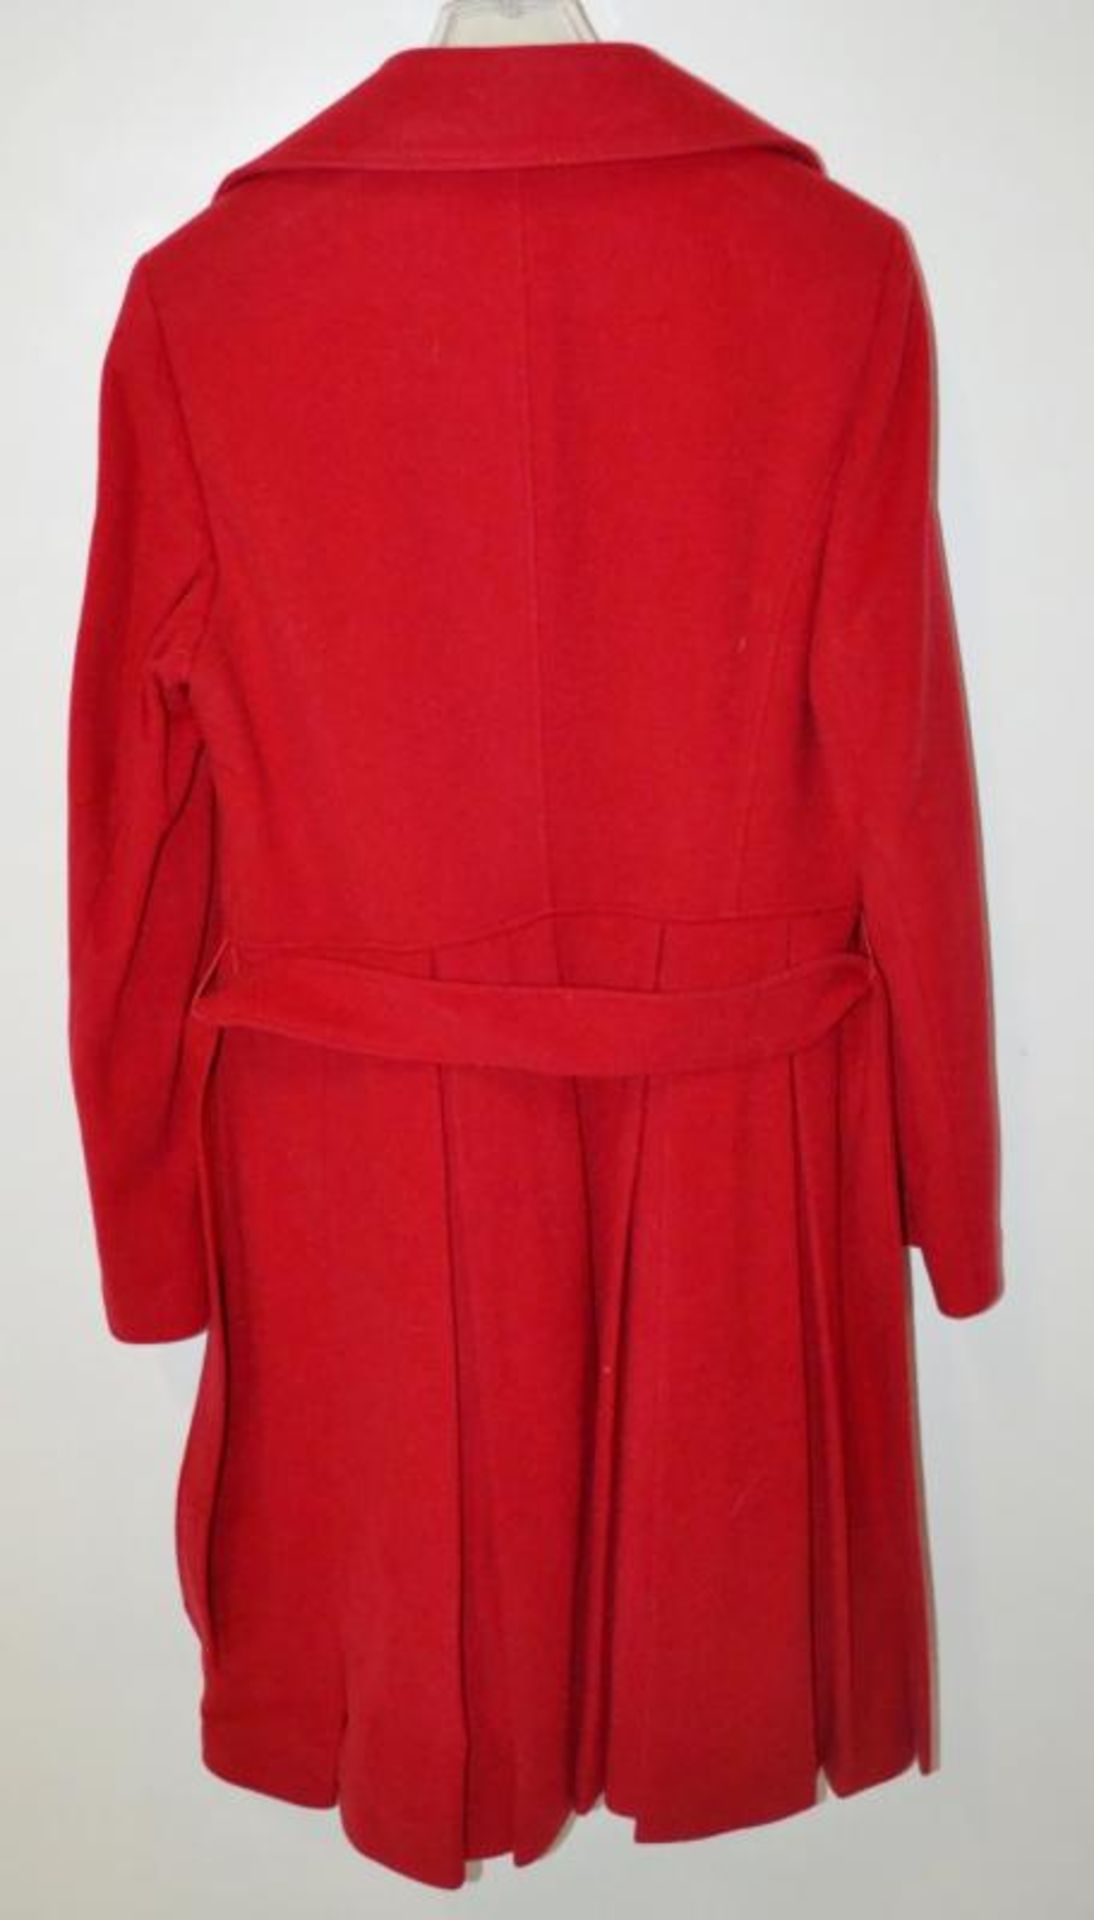 1 x Steilmann Womens Premium Wool Rich Winter Coat In Bright Red - UK Size 12 - New Sample Stock - C - Image 2 of 5